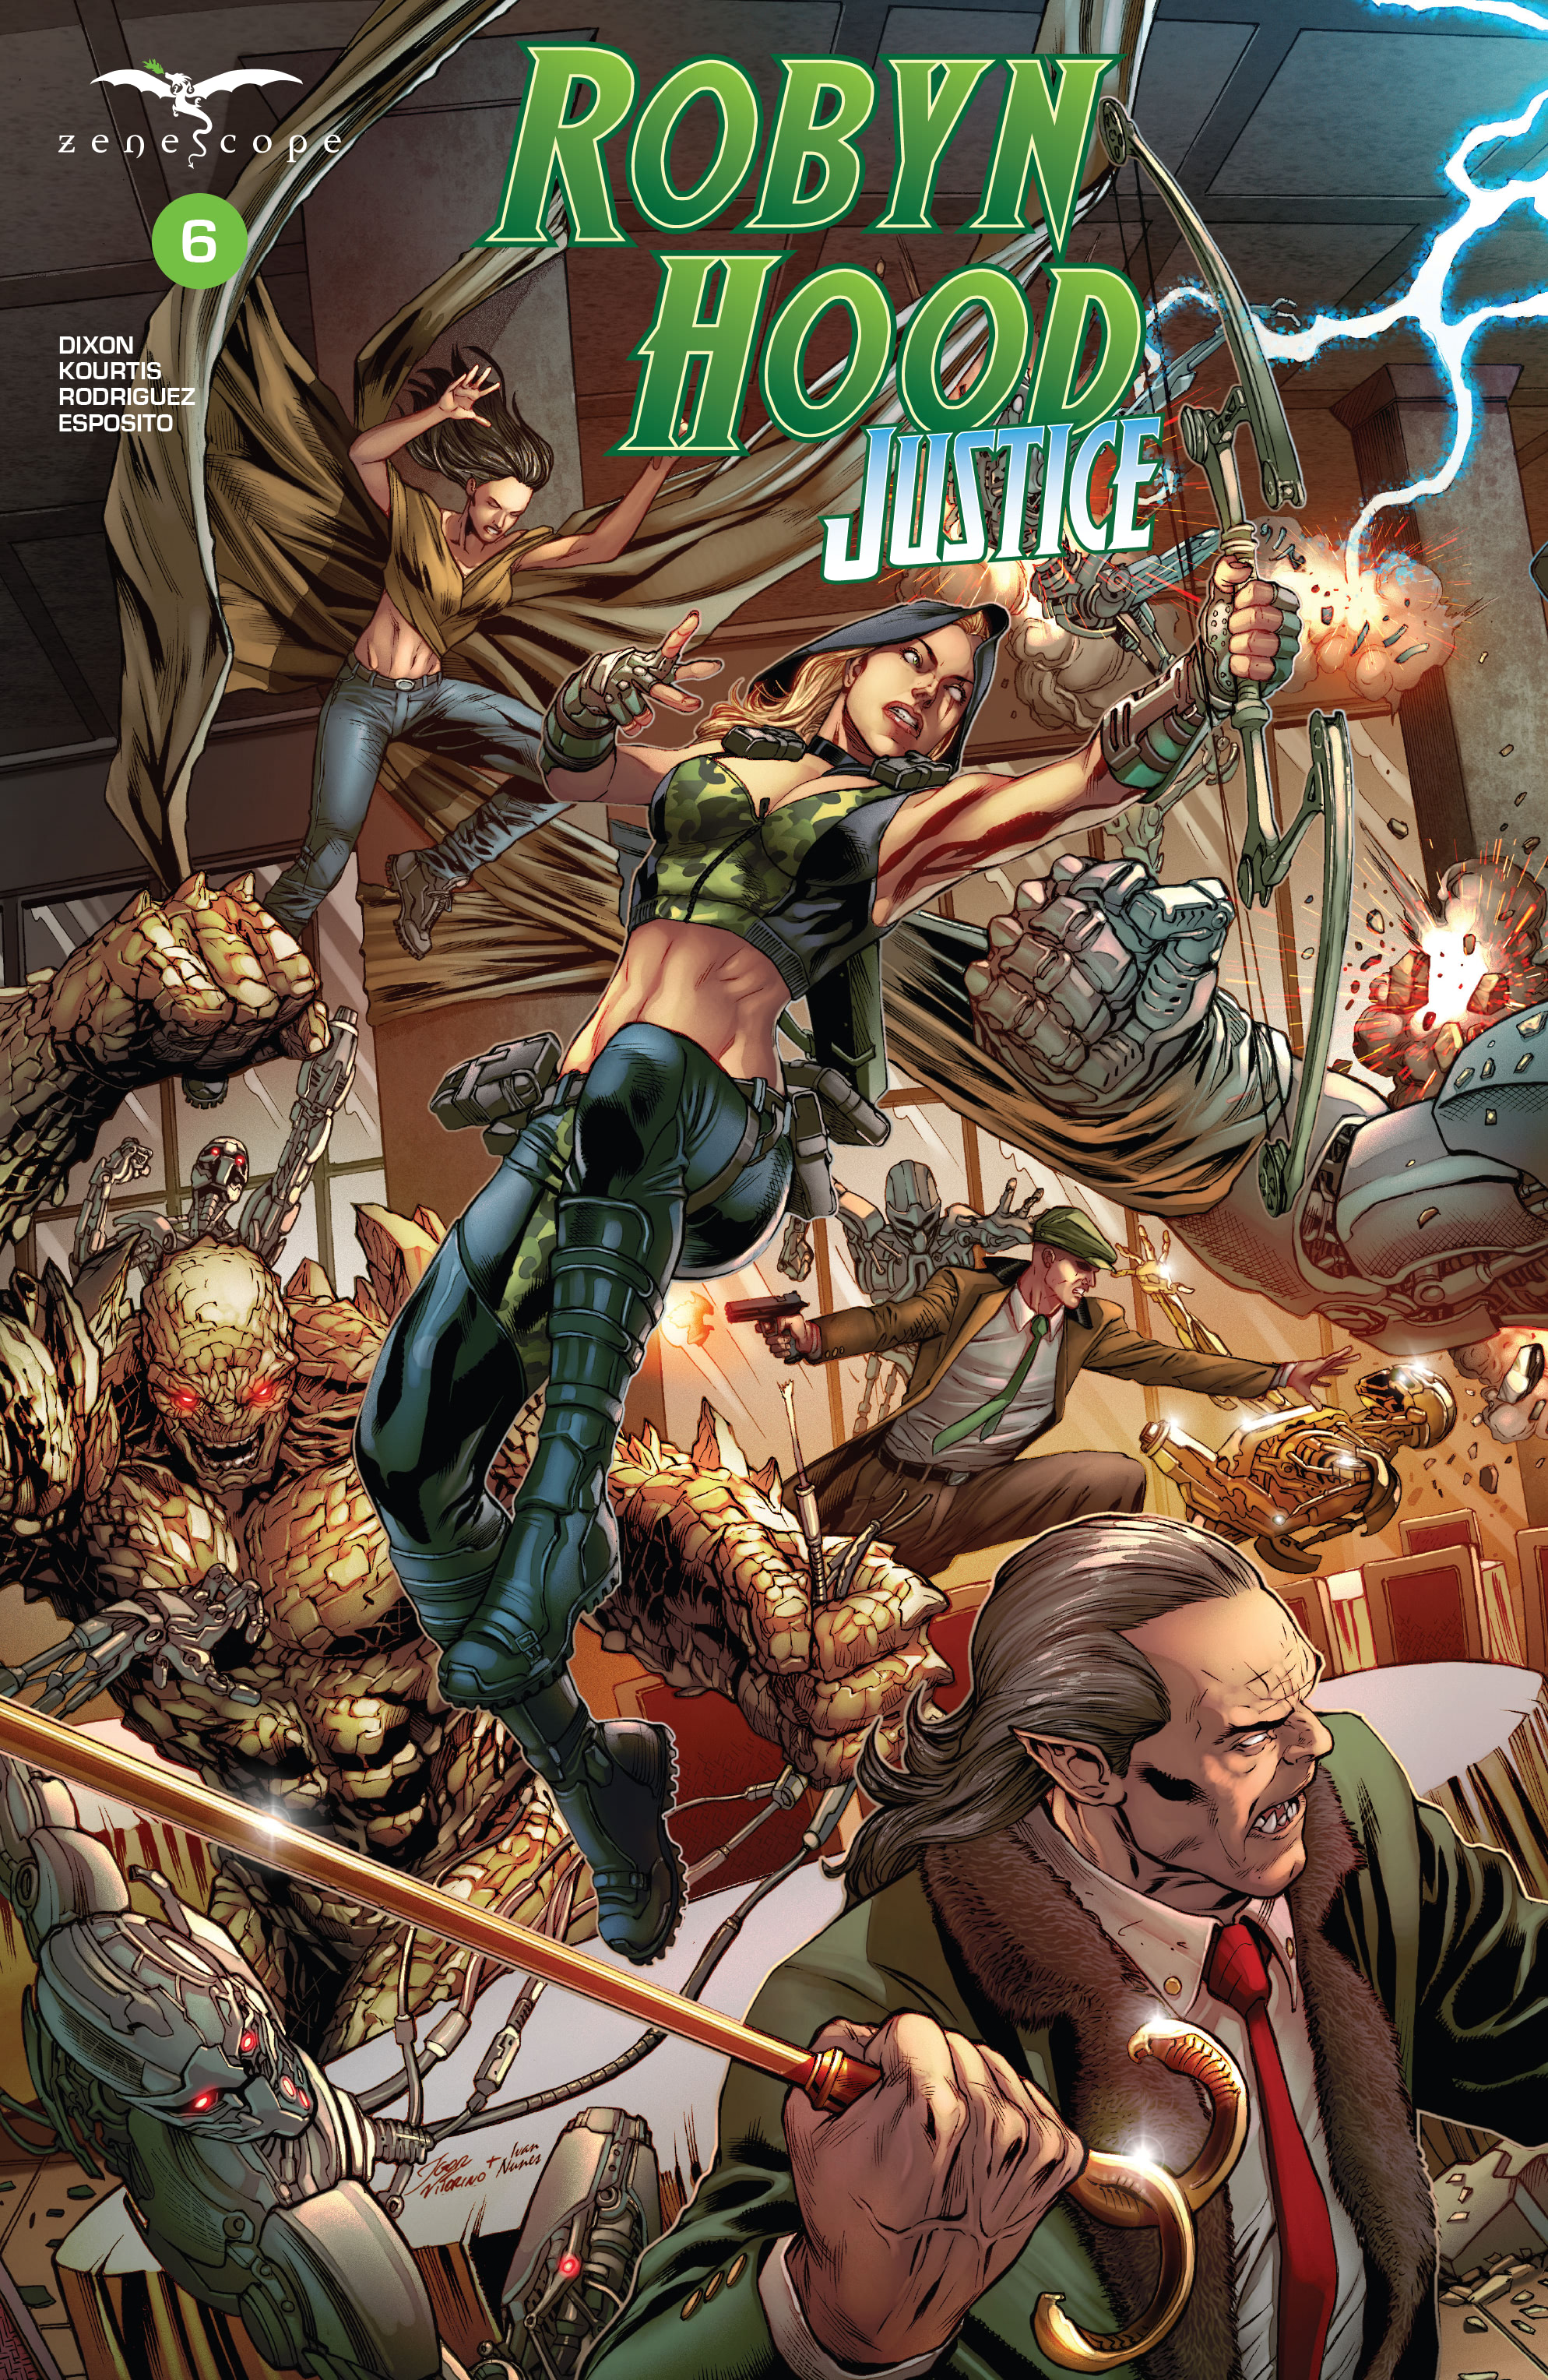 Read online Robyn Hood: Justice comic -  Issue #6 - 1